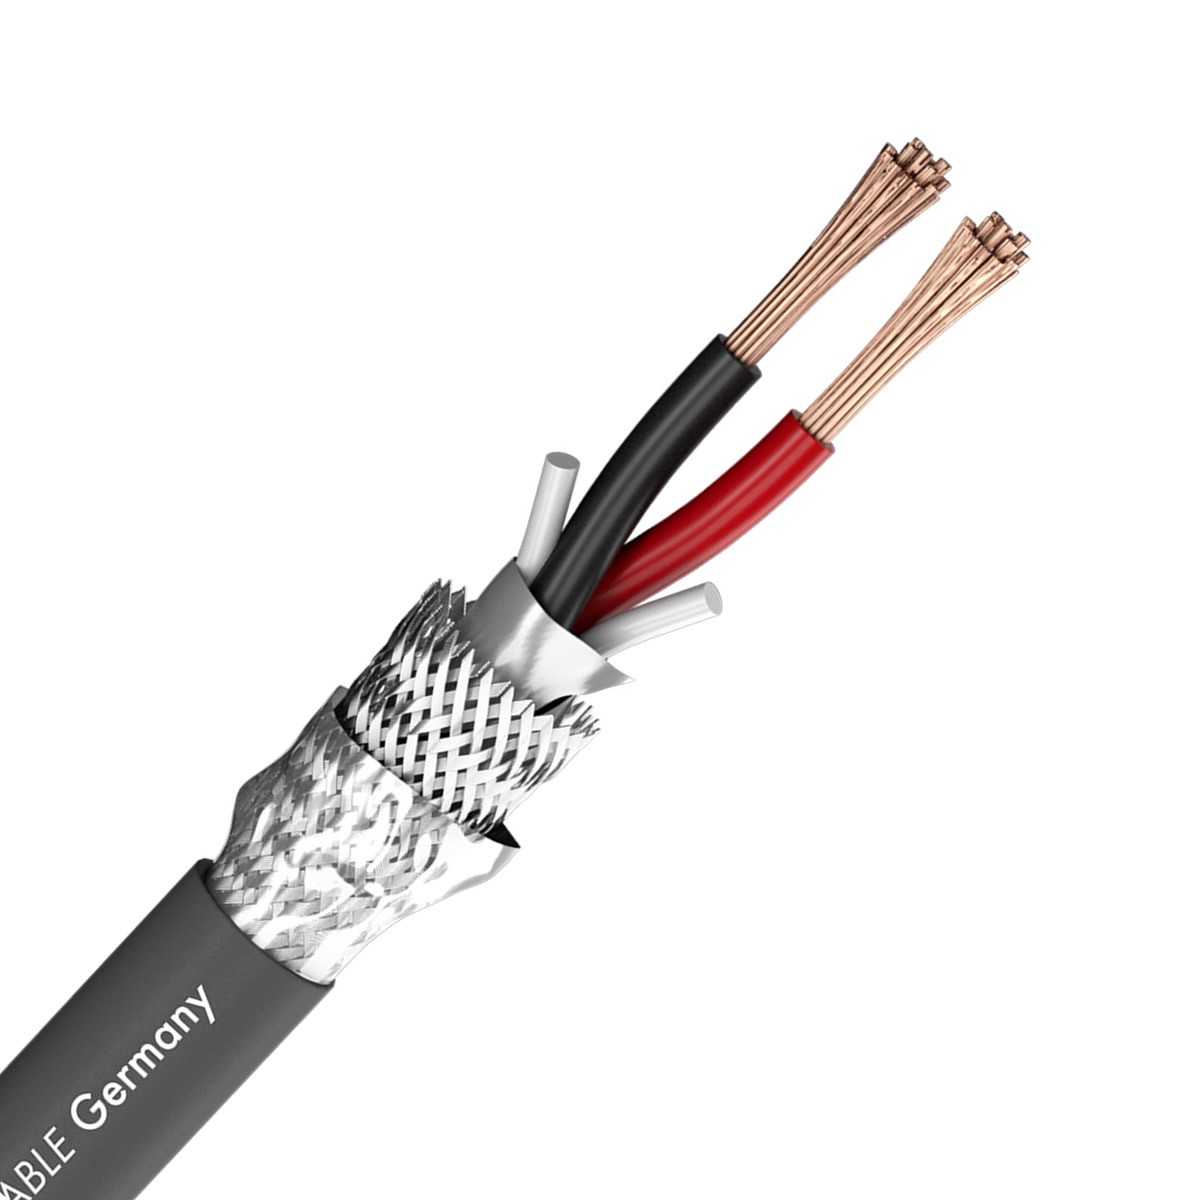 SOMMERCABLE MERIDIAN SP225 FG Speaker Cable OFC Copper FRNC Shielded 2x2.5mm² Ø 8.3mm